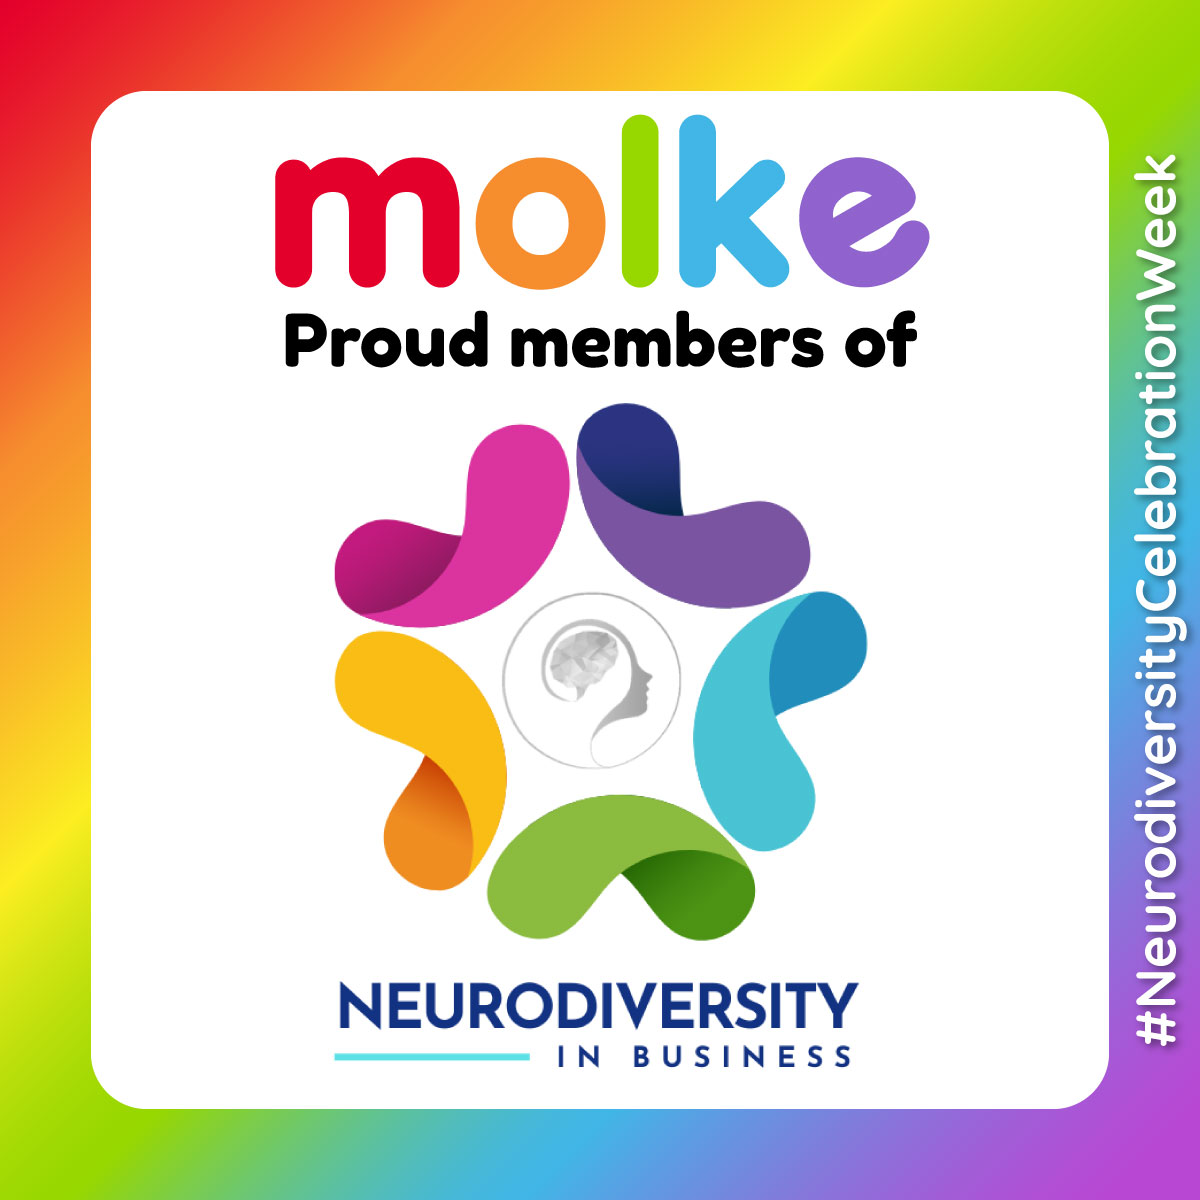 We are really happy to announce we have become a founding member of @NDinBusiness (NiB). 

Neurodiversity in Business works to promote inclusive recruitment & work practices, many of which already align with what we are doing at Molke.🧵

#NeurodiversityInBusiness #NCW